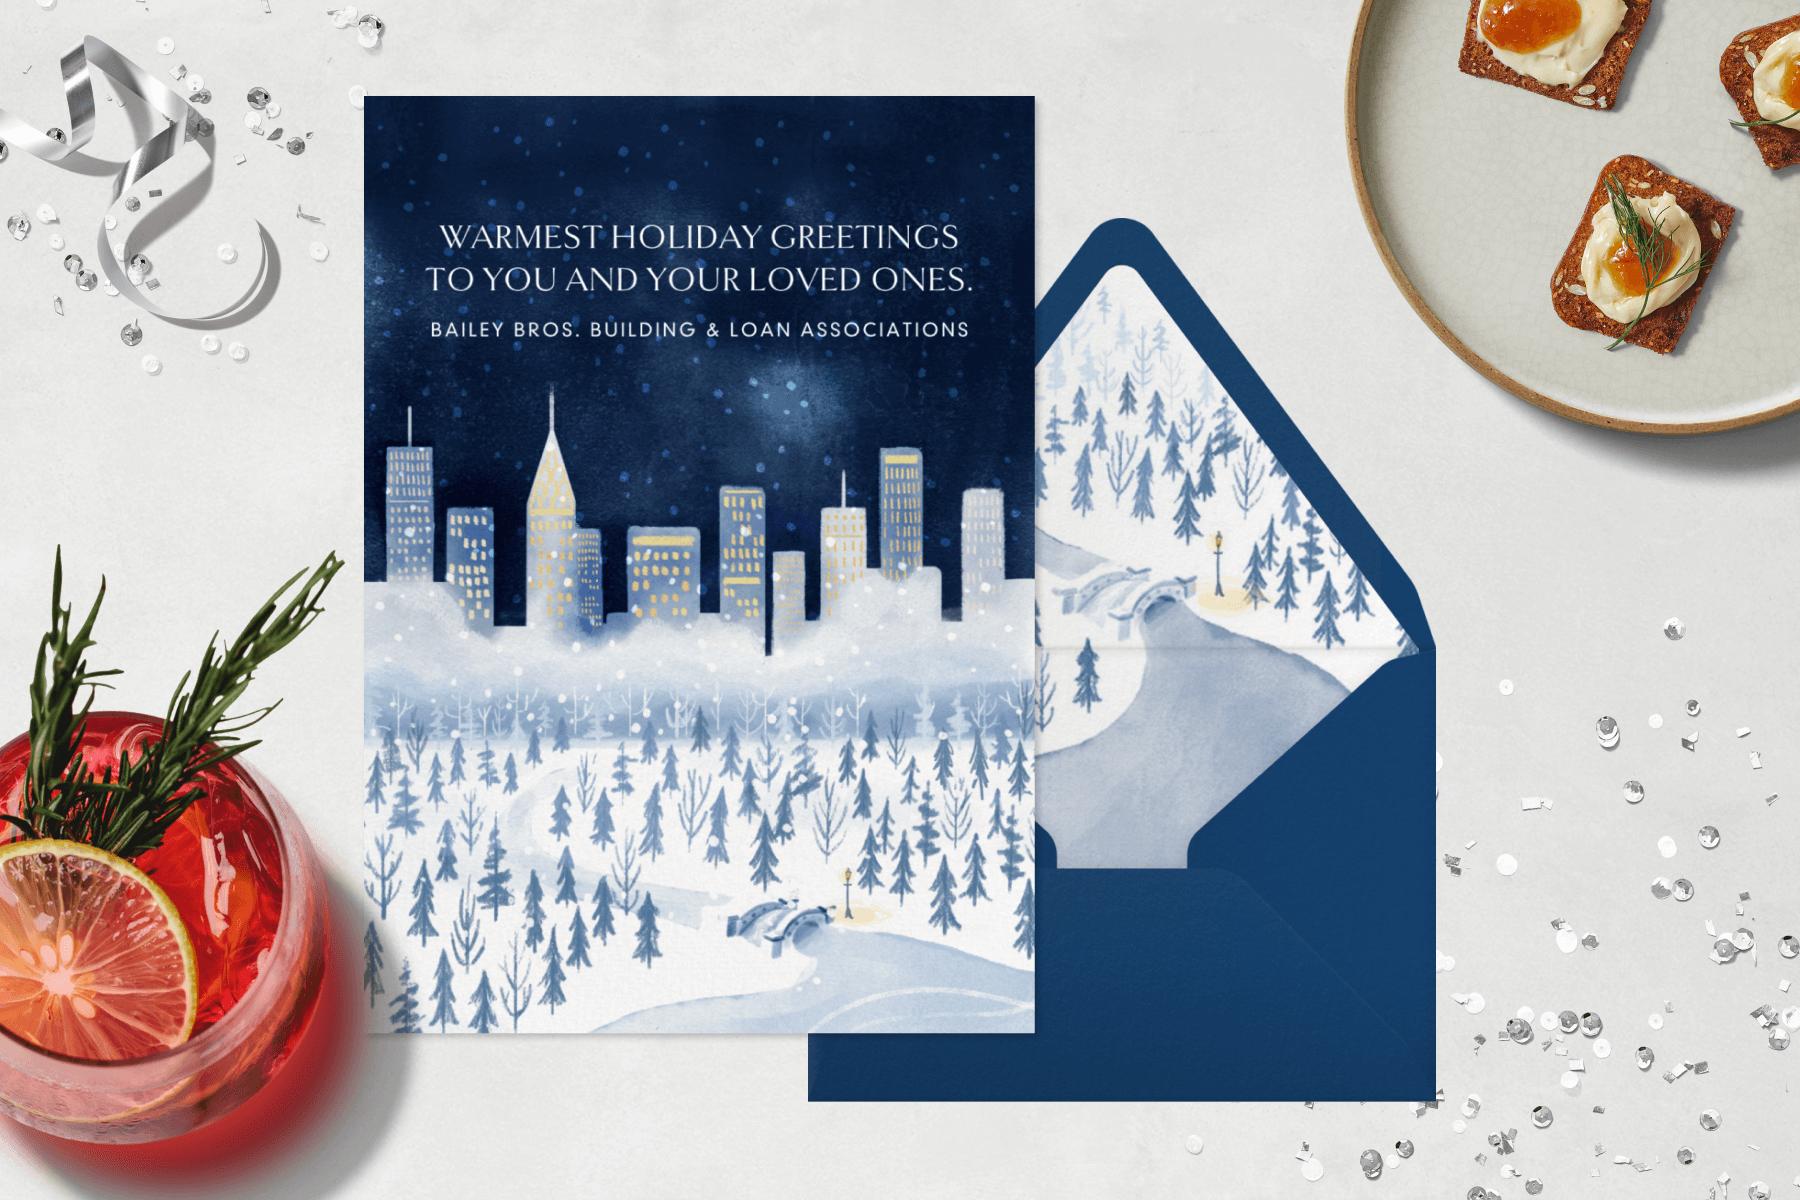 A navy blue greeting card shows a snowy winter scene beneath a city skyline at night. Nearby, a matching envelope, red cocktail, silver ribbon, confetti, and a plate with hors d'oeuvres.